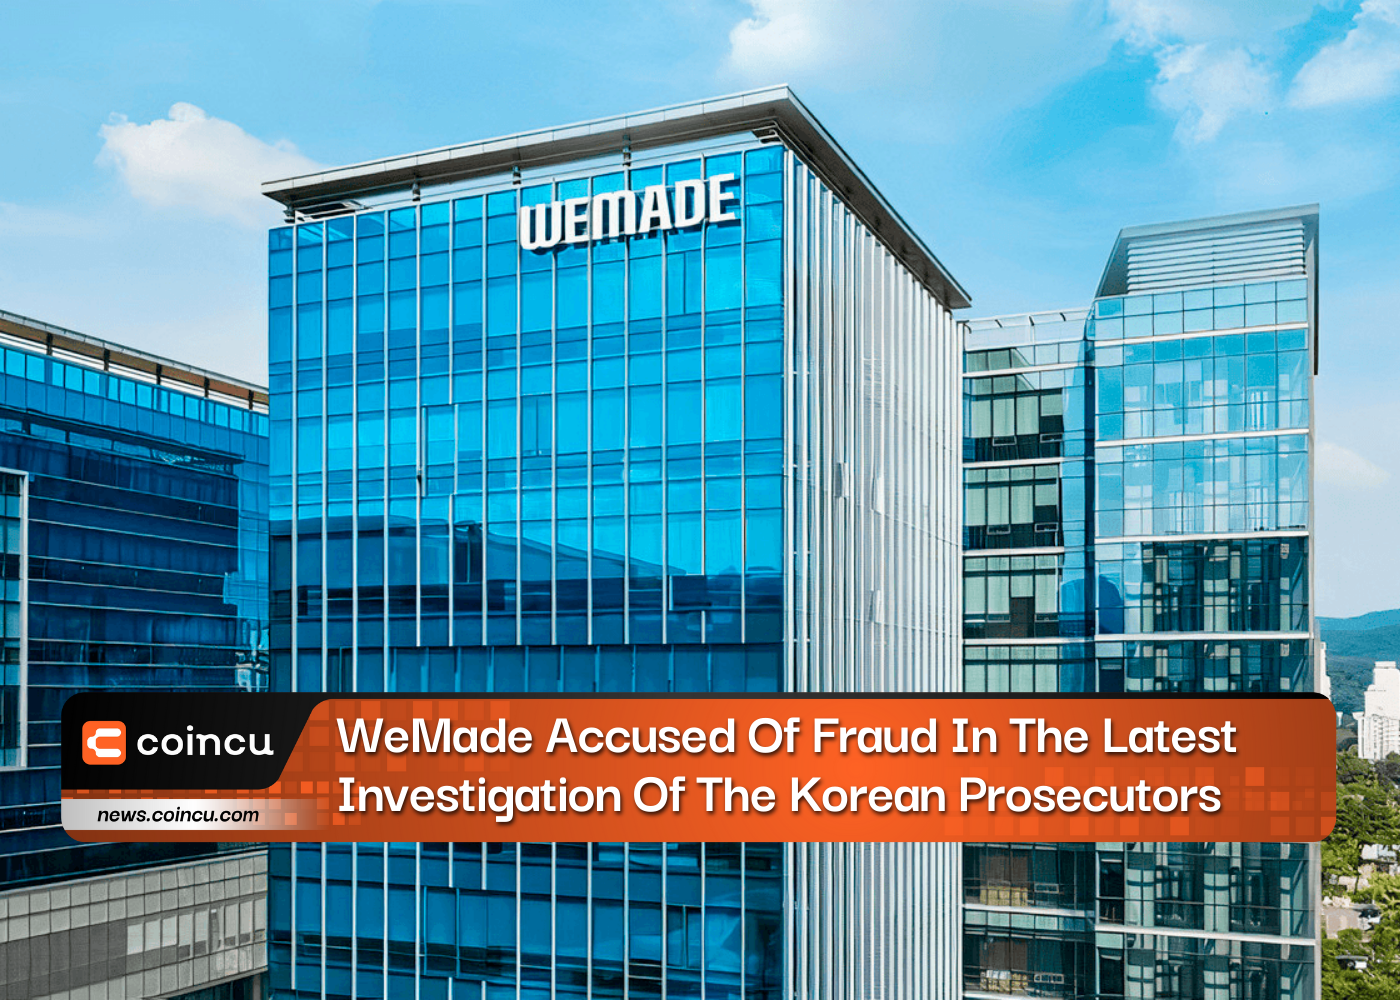 BREAKING: WeMade Accused Of Fraud In The Latest Investigation Of The Korean Prosecutors